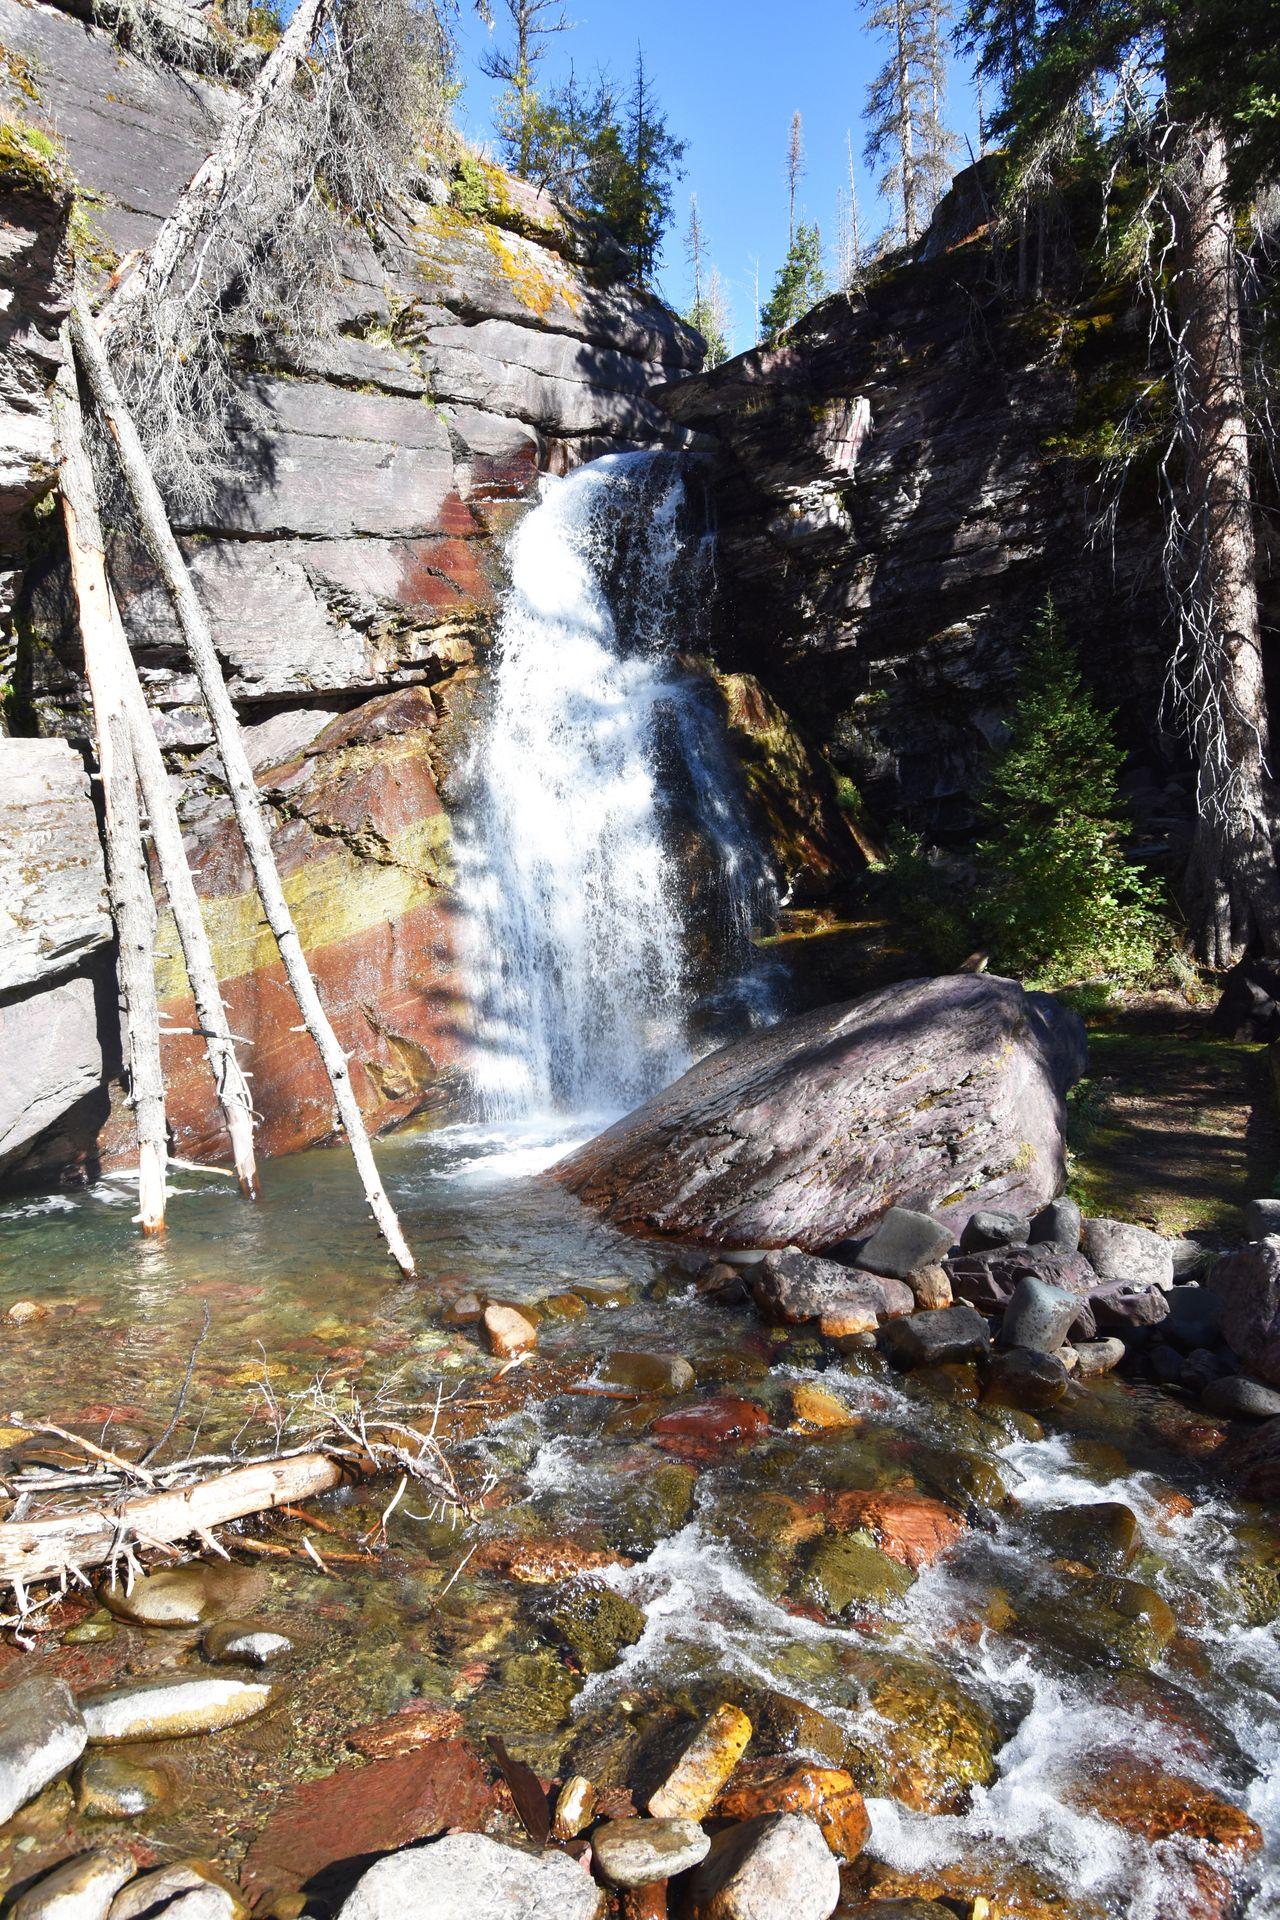 A waterfall coming down a rock wall. The wall is striped with red and yellow and there are red and yellow rocks in the water below.